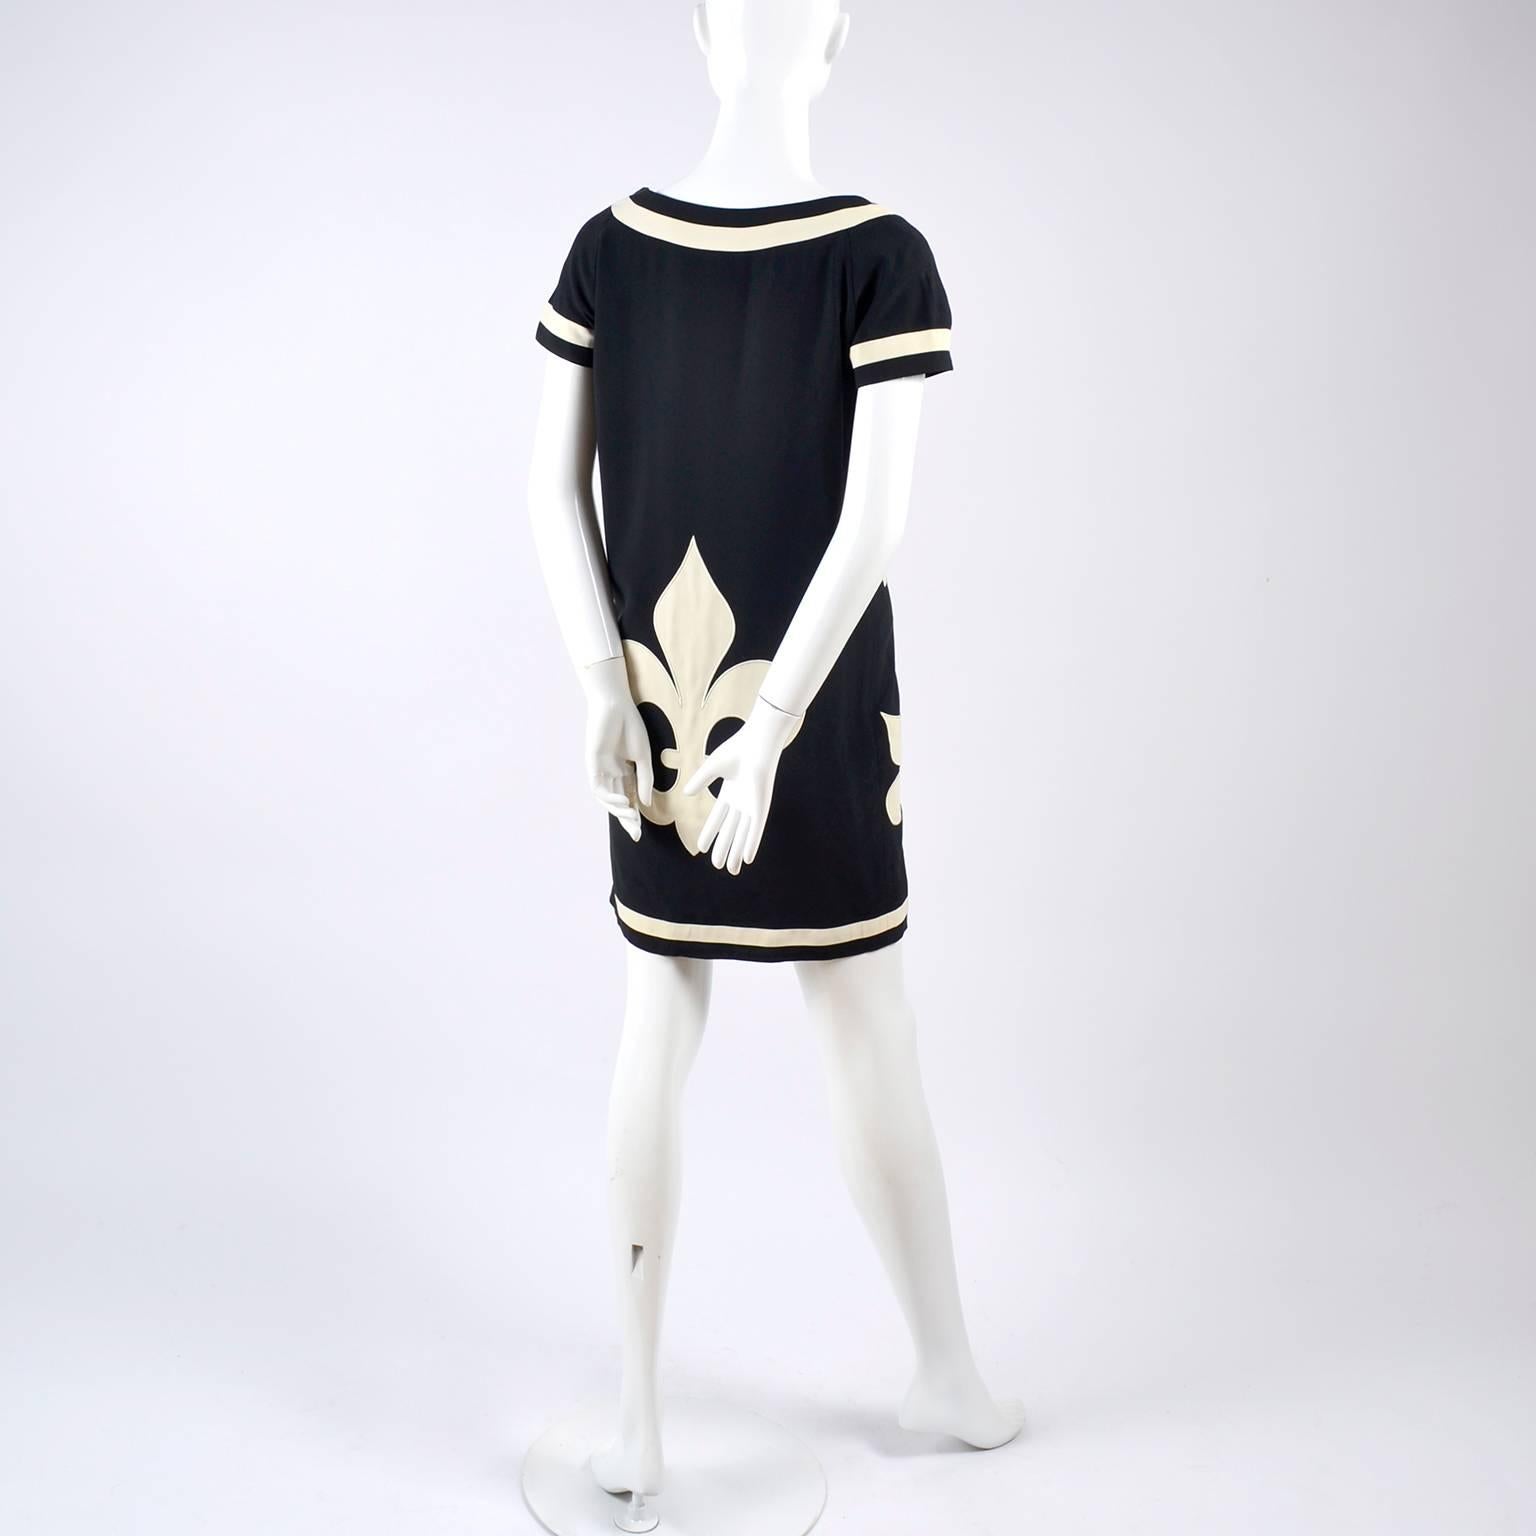 1989 Vintage Moschino Couture Cruise Me Baby Dress in Bold Fleur de Lis Print 4